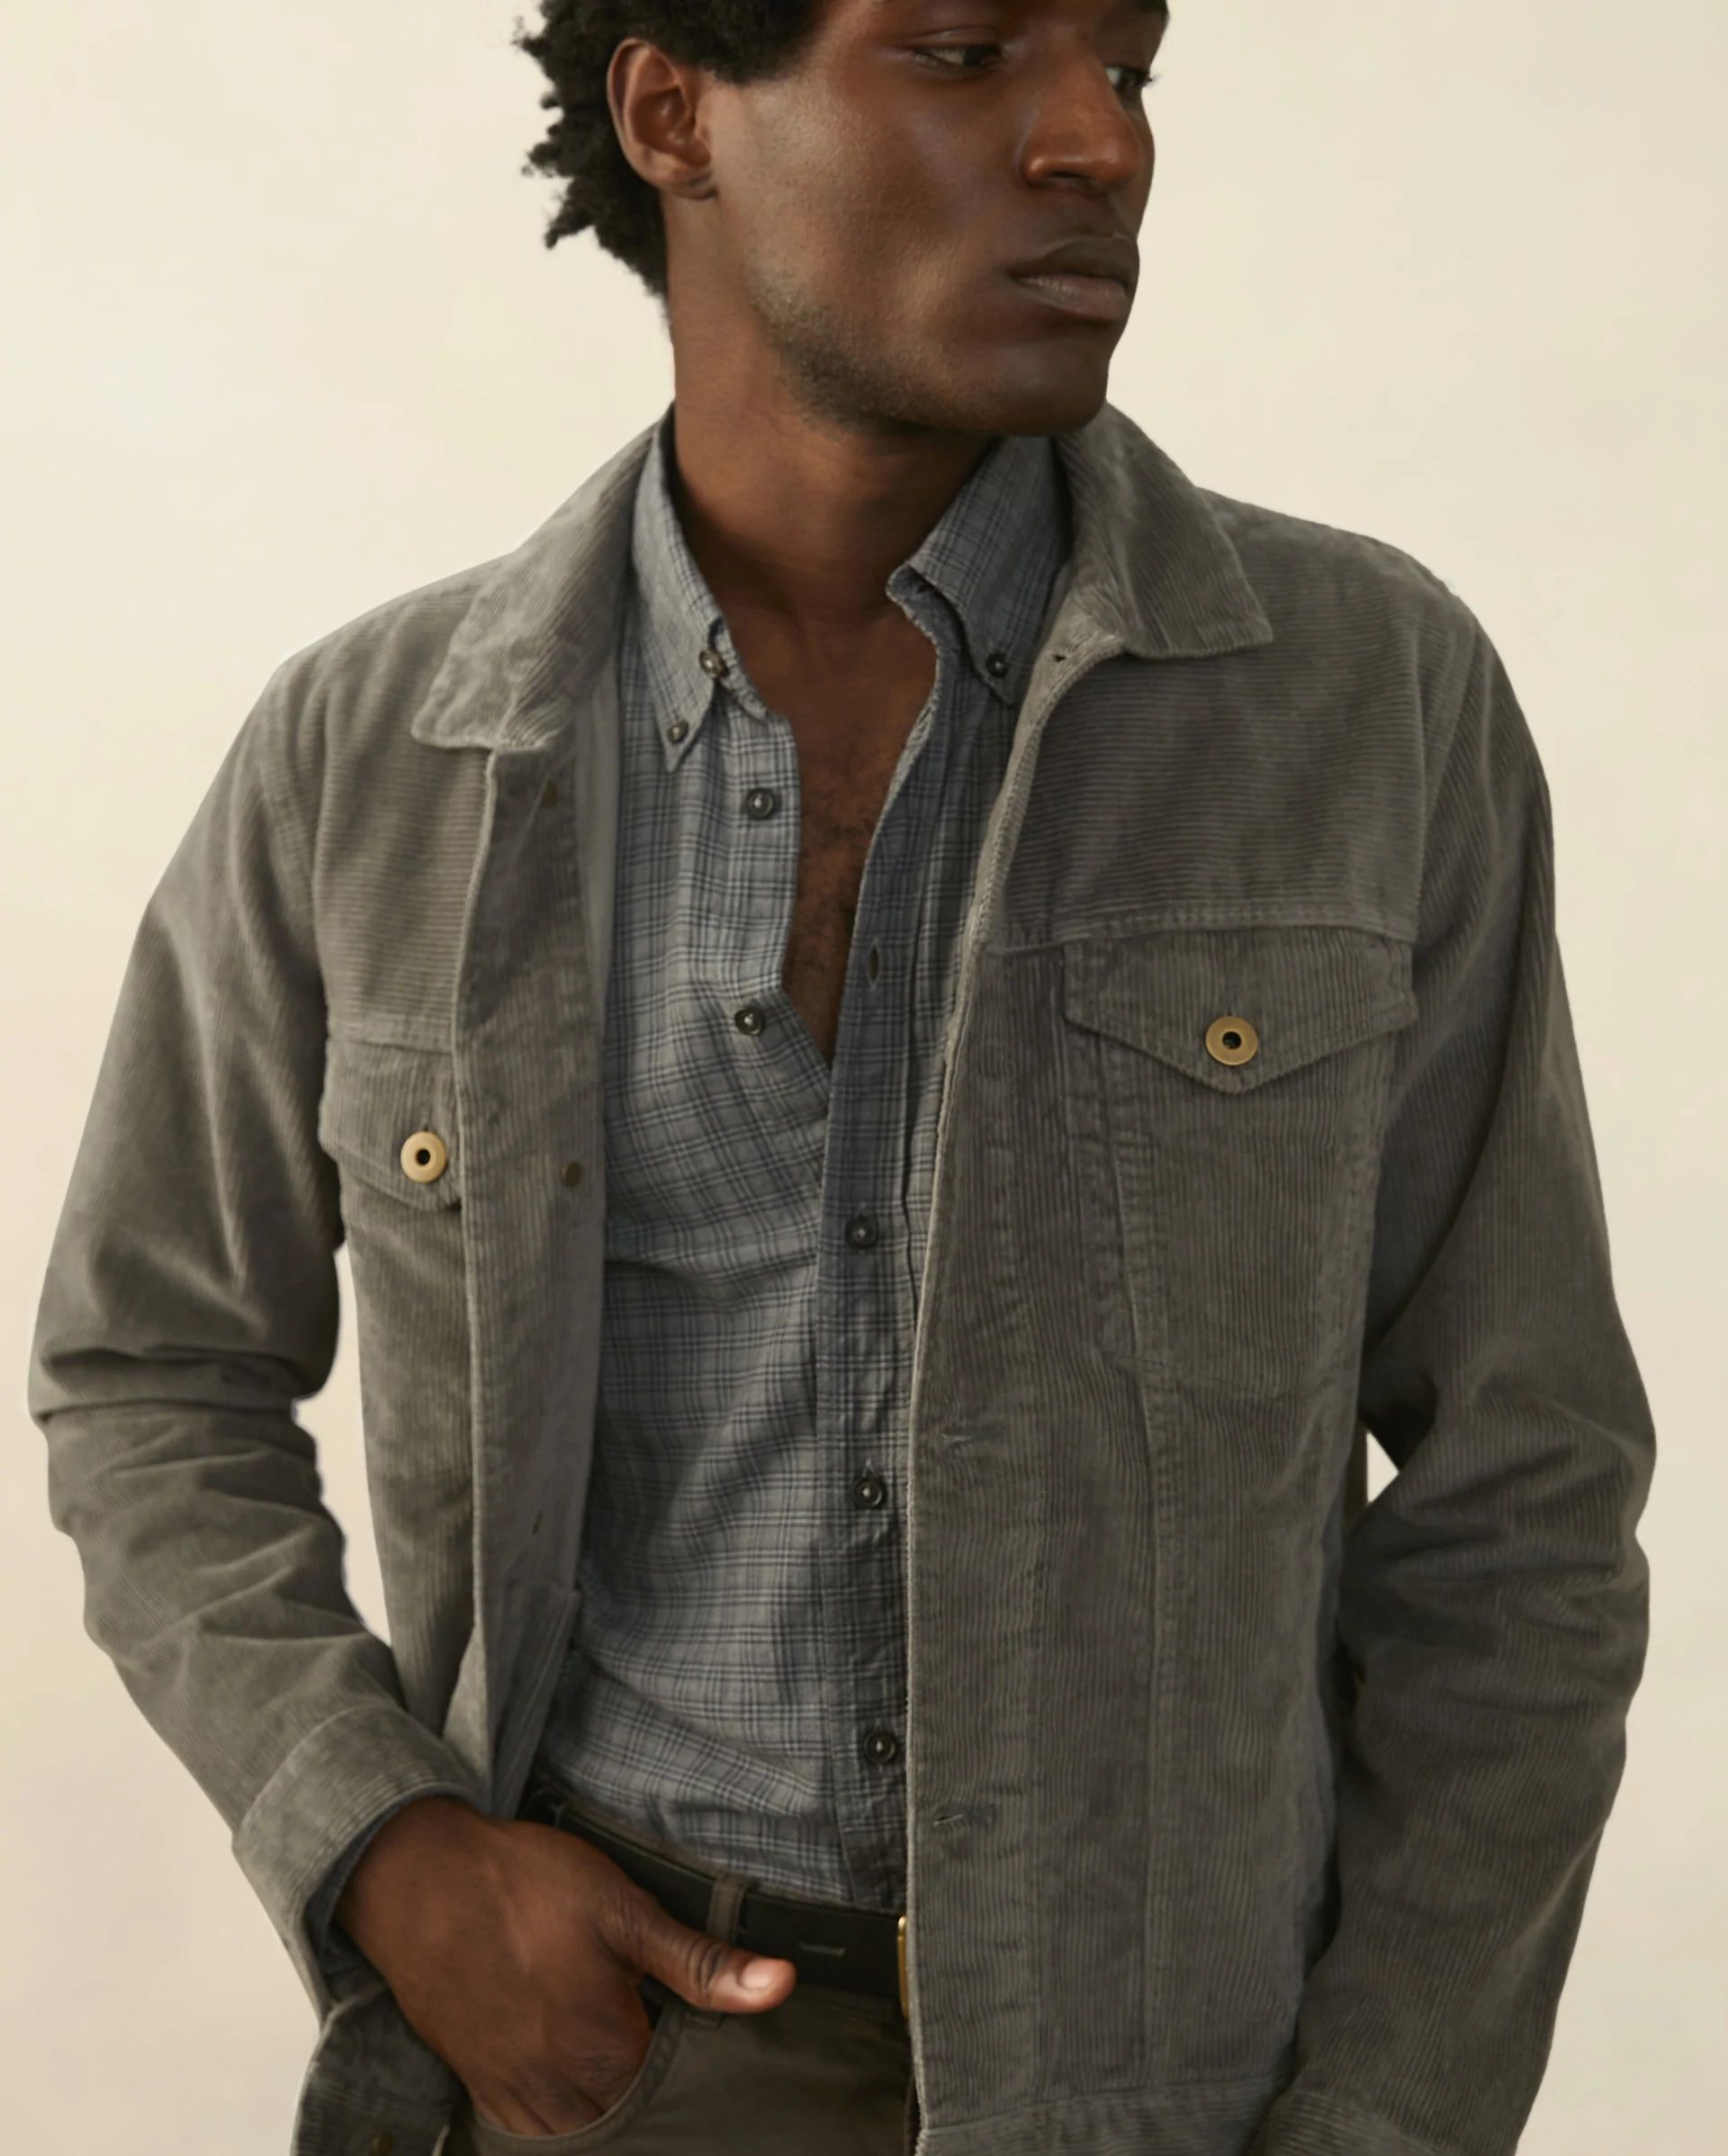 This Trucker Jacket Trades Traditional Denim for Classy Corduroy